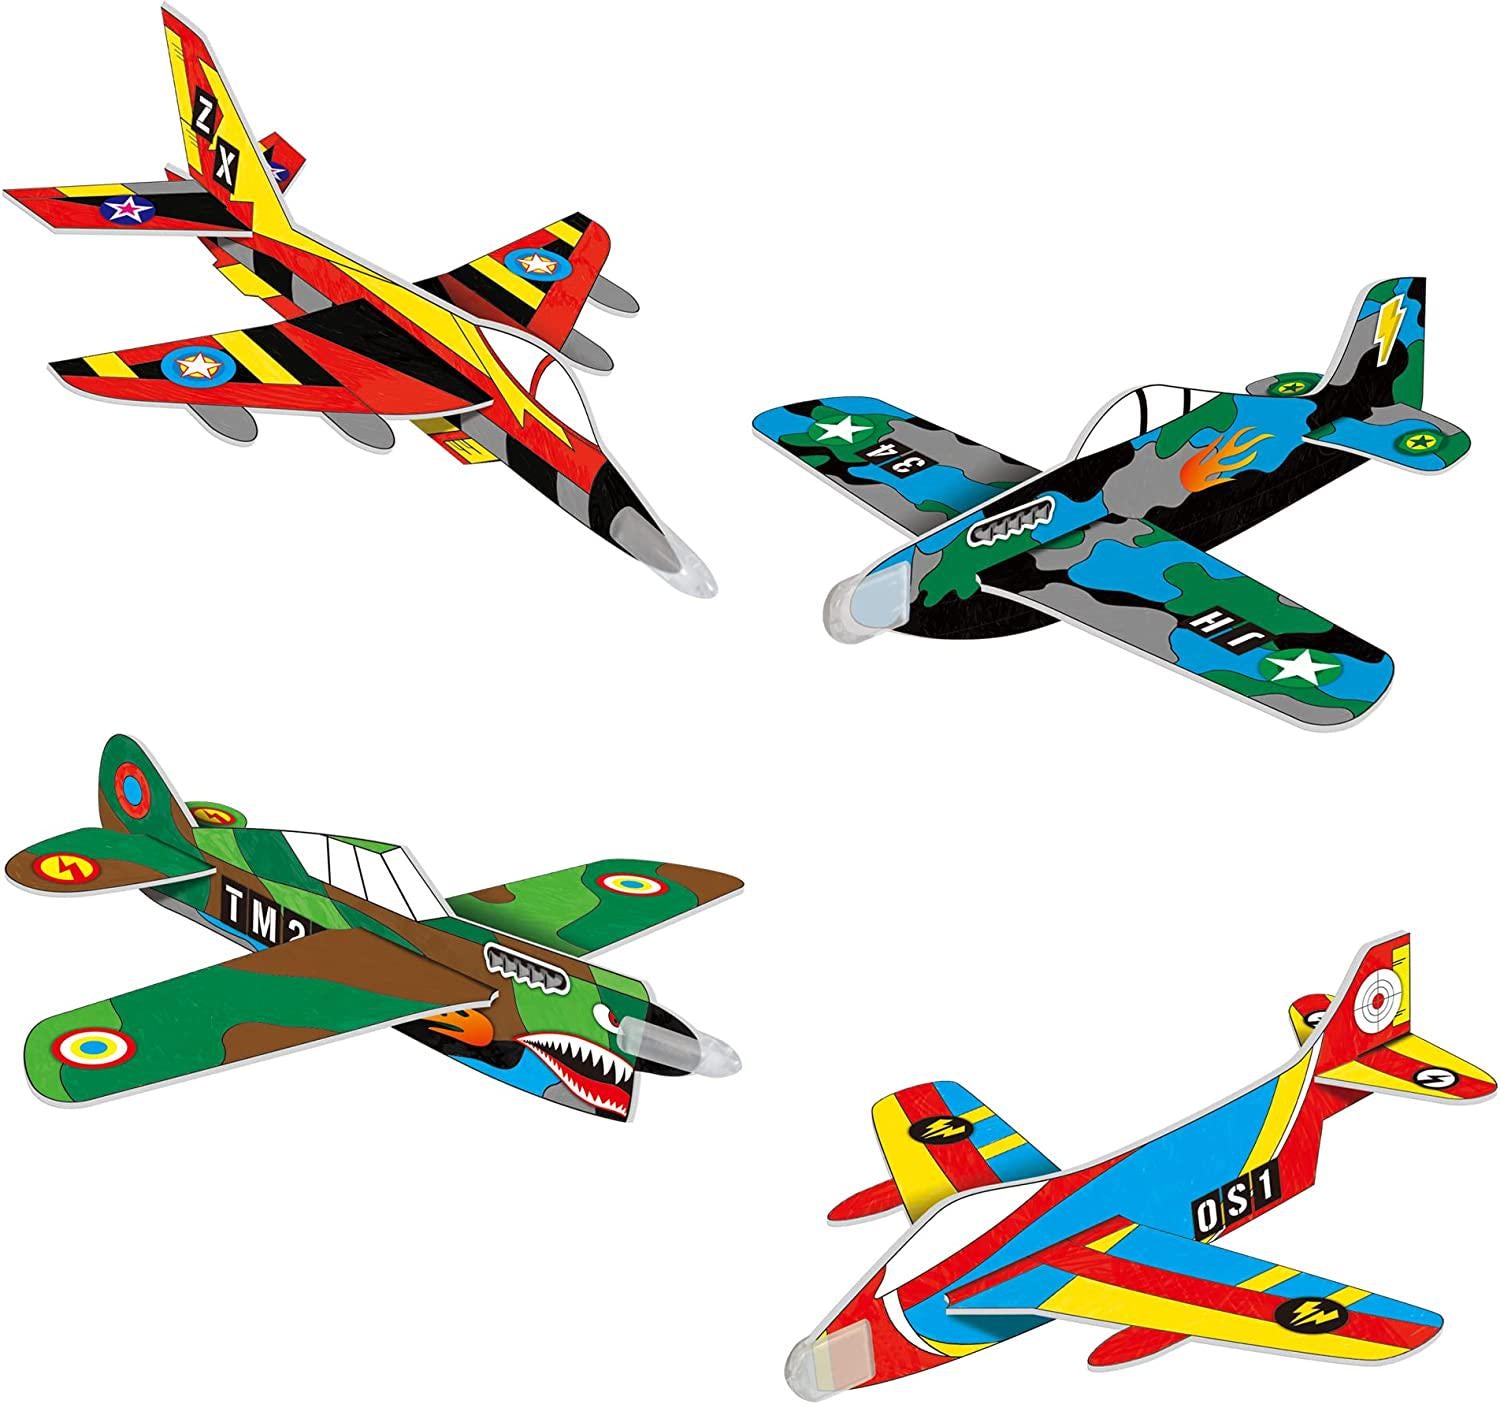 Galt, Galt Toys, Glider Planes, Craft Kit for Kids, Ages 5 Years Plus